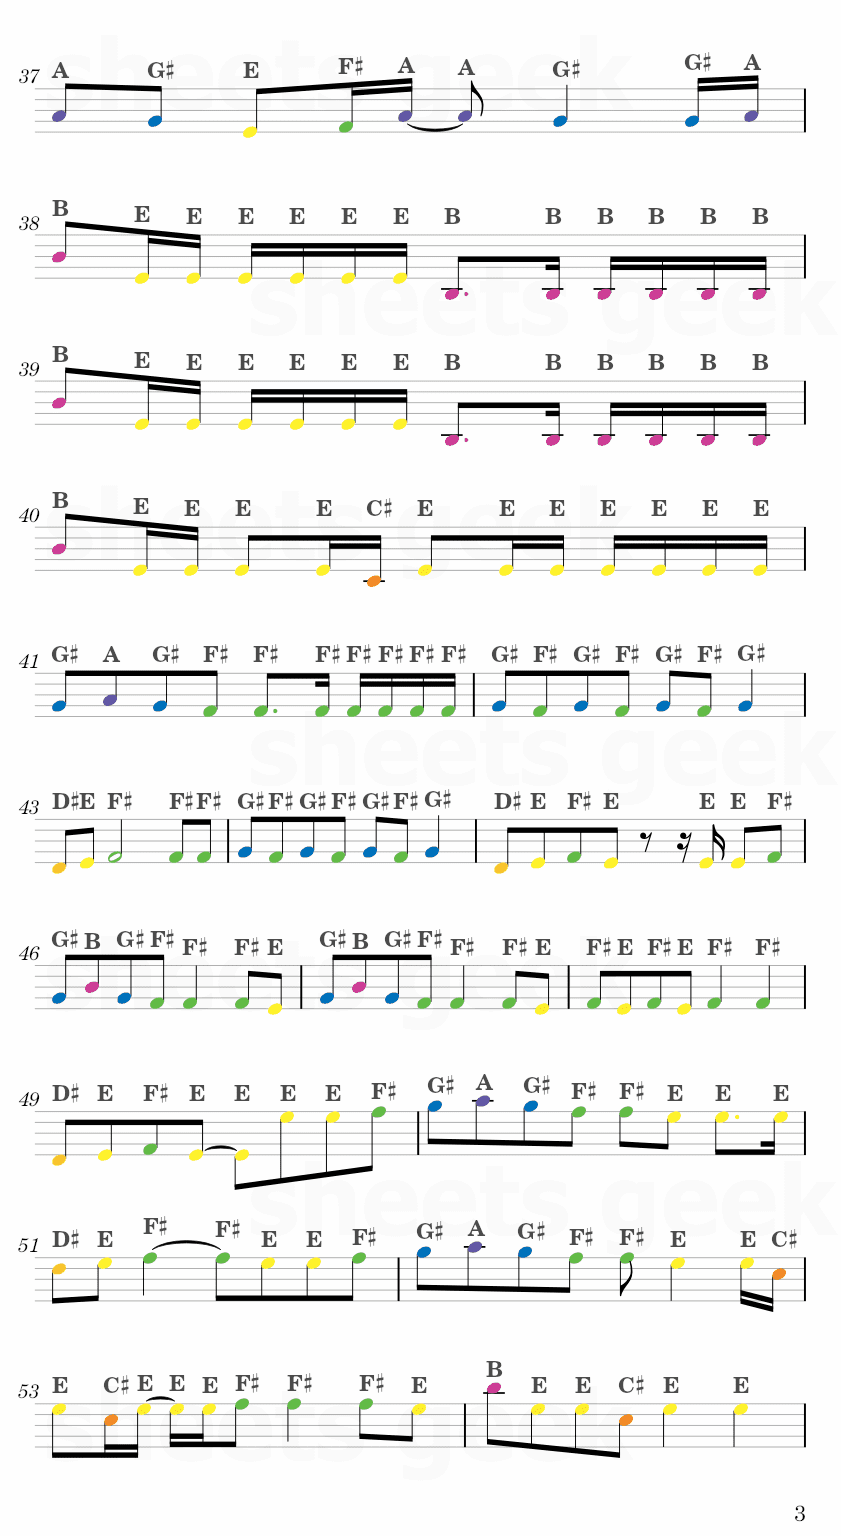 Some - BOL4 Easy Sheet Music Free for piano, keyboard, flute, violin, sax, cello page 3